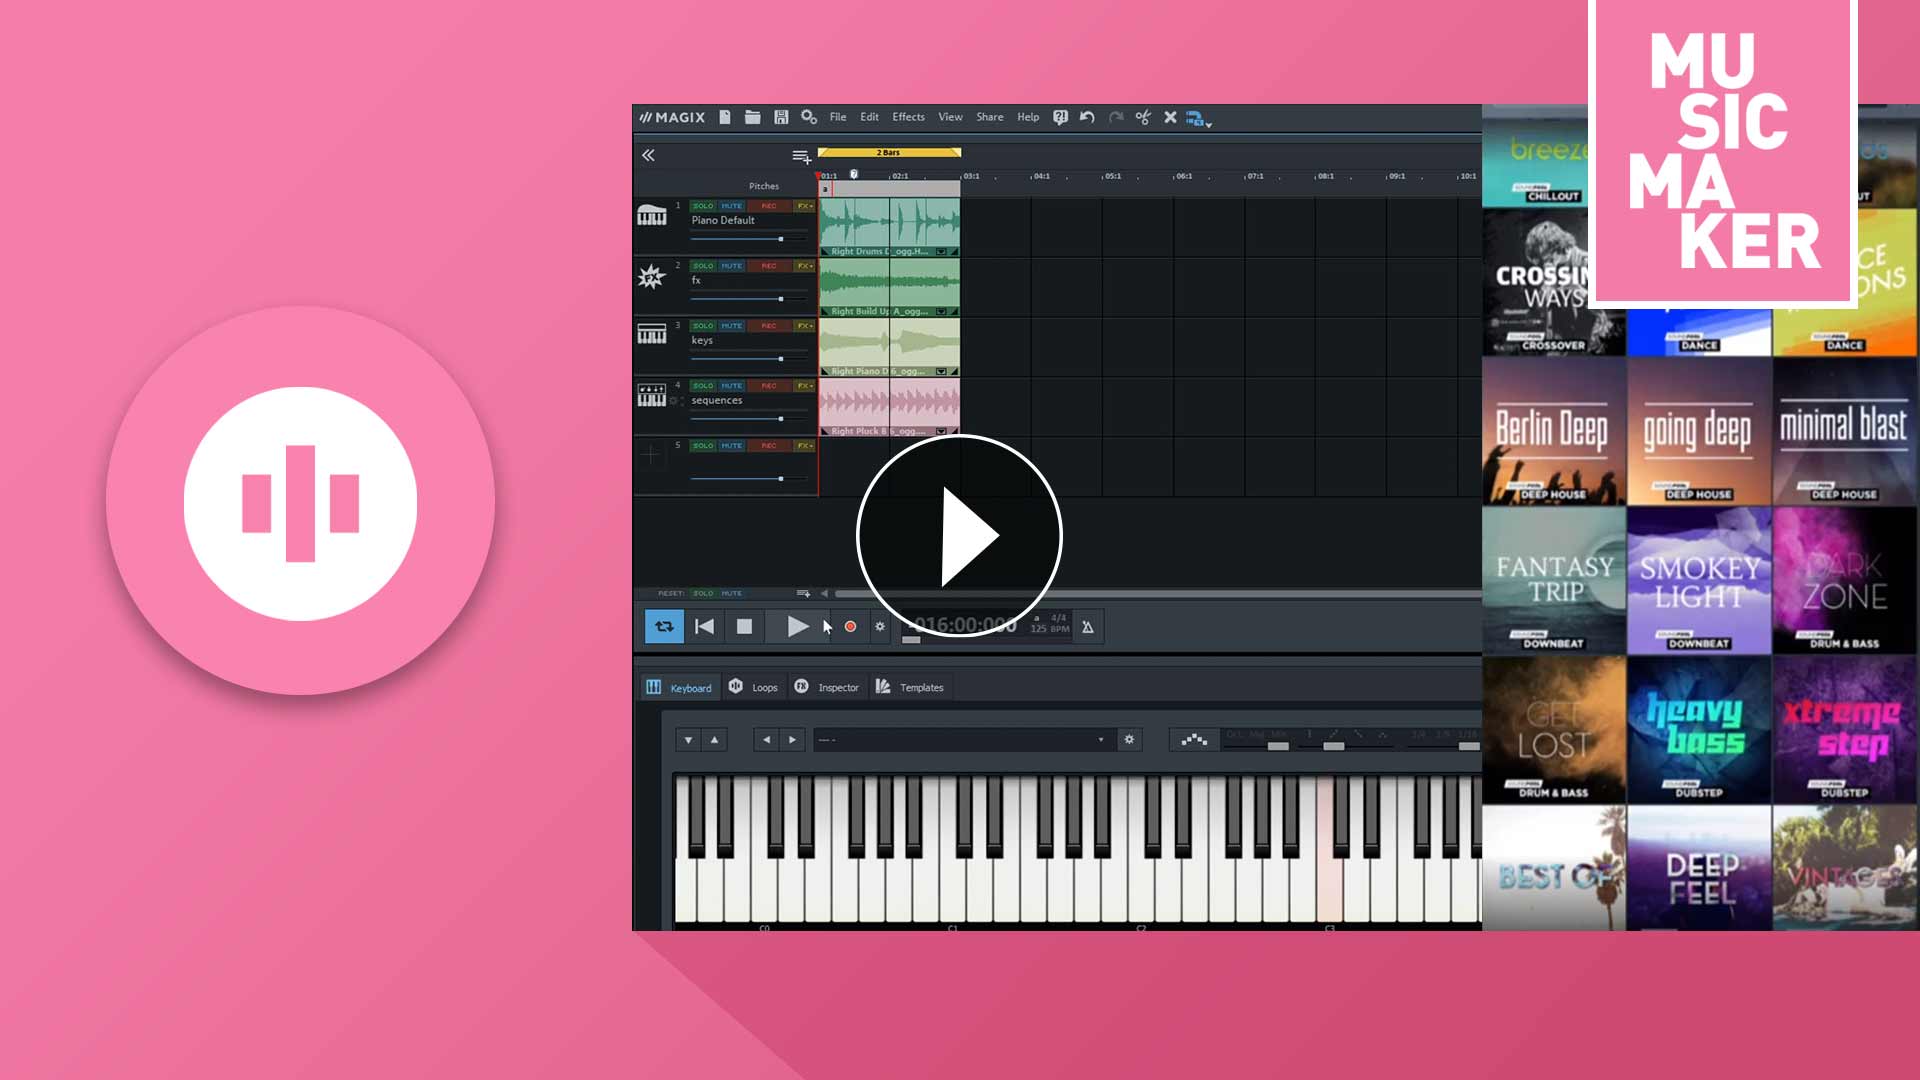 how to install soundpools magix music maker 2014